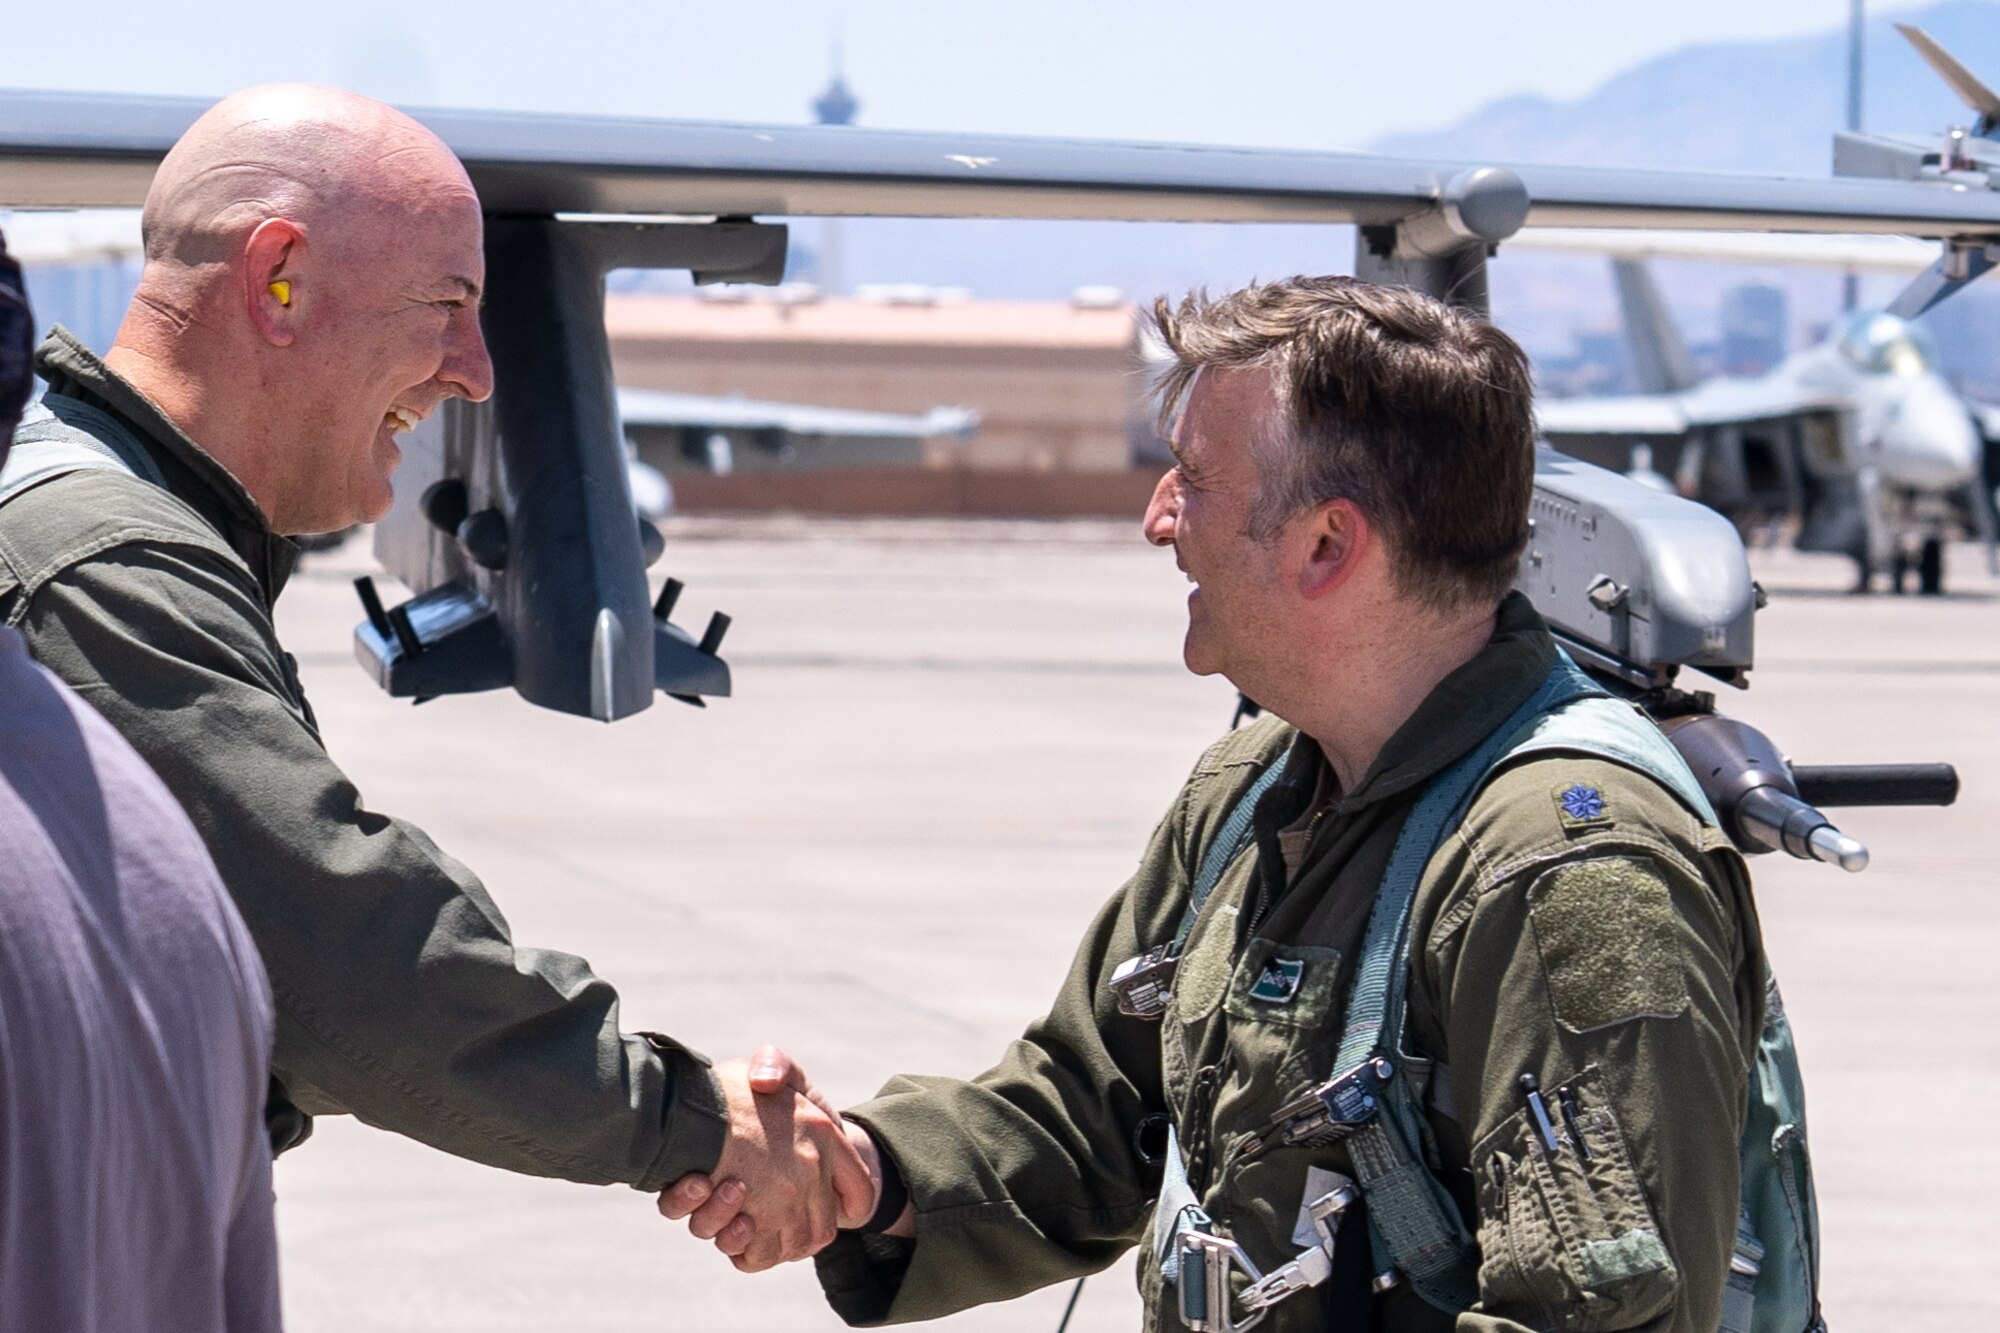 Mr. Rob McHenry, the Deputy Director of the Defense Advanced Research Projects Agency (DARPA), left, and U.S. Air Force Lt. Col. Dustin Sanders, deputy commander of the 422 Test and Evaluations Squadron, meet after a familiarization flight at Nellis Air Force Base, Nevada, May 24, 2023.